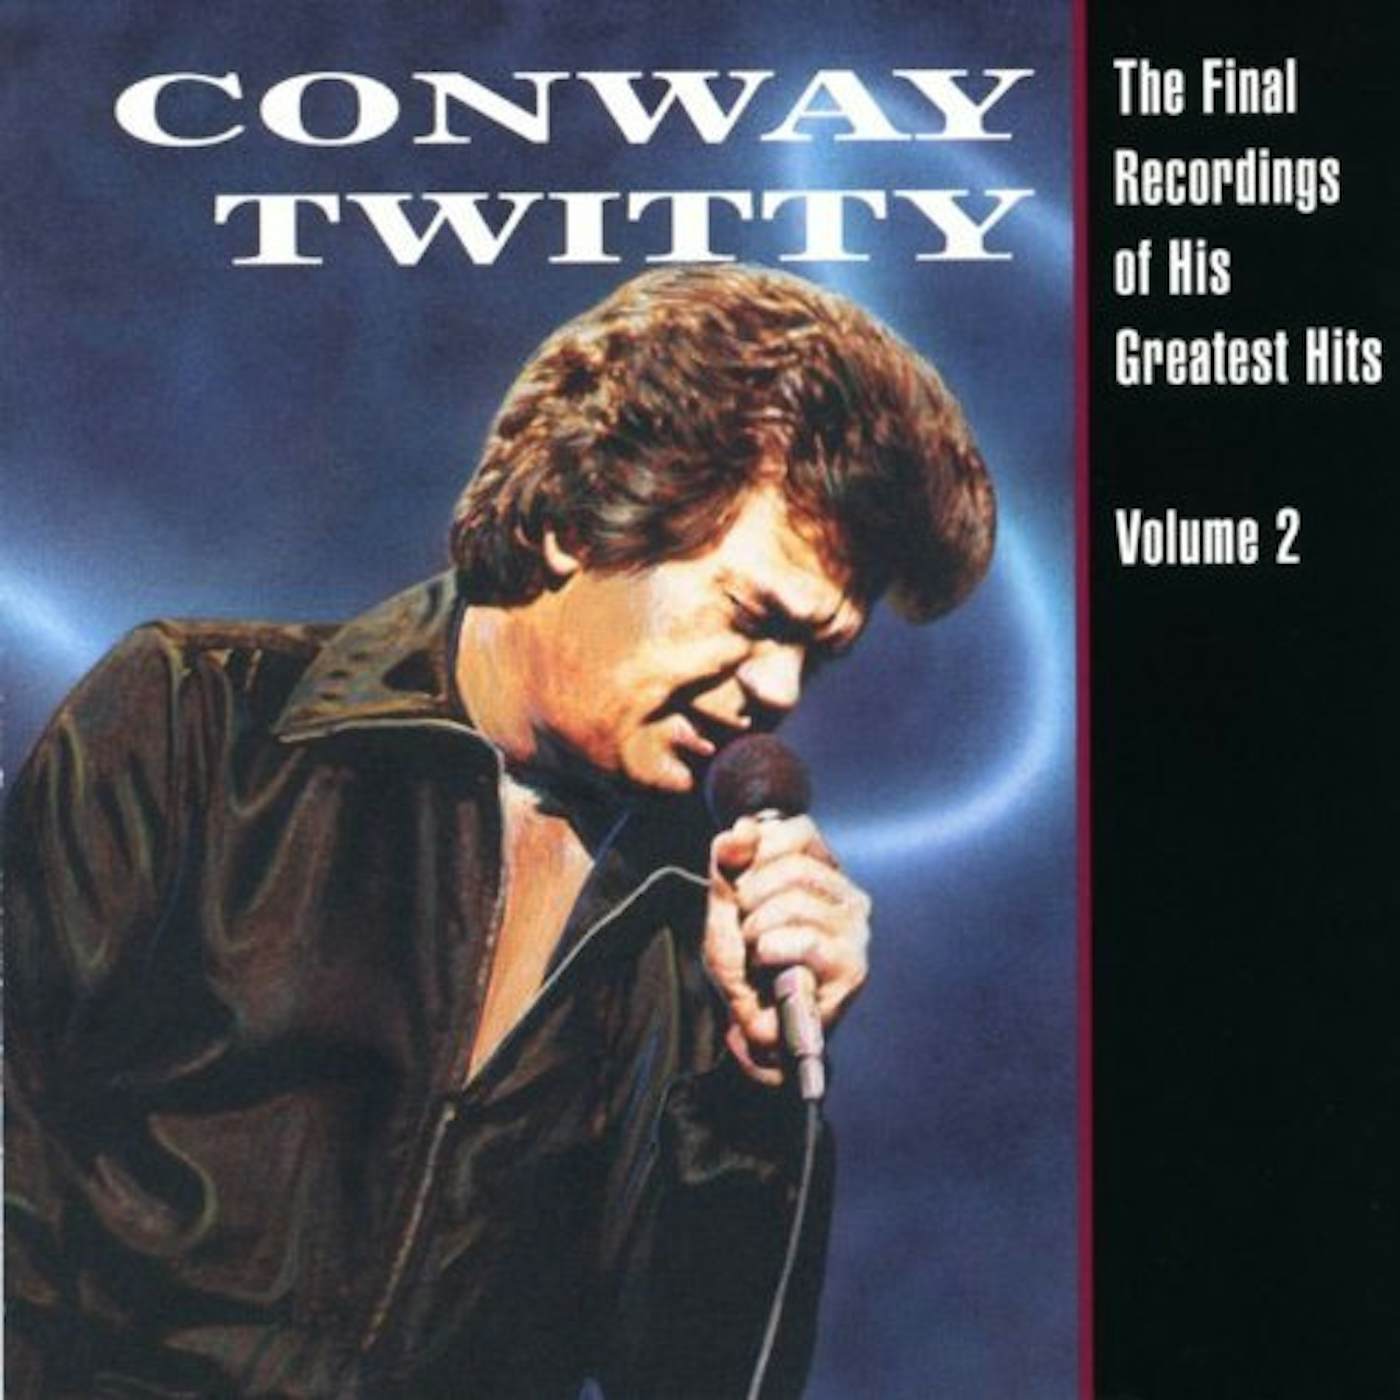 Conway Twitty FINAL RECORDINGS OF HIS GREATEST HITS 2 CD